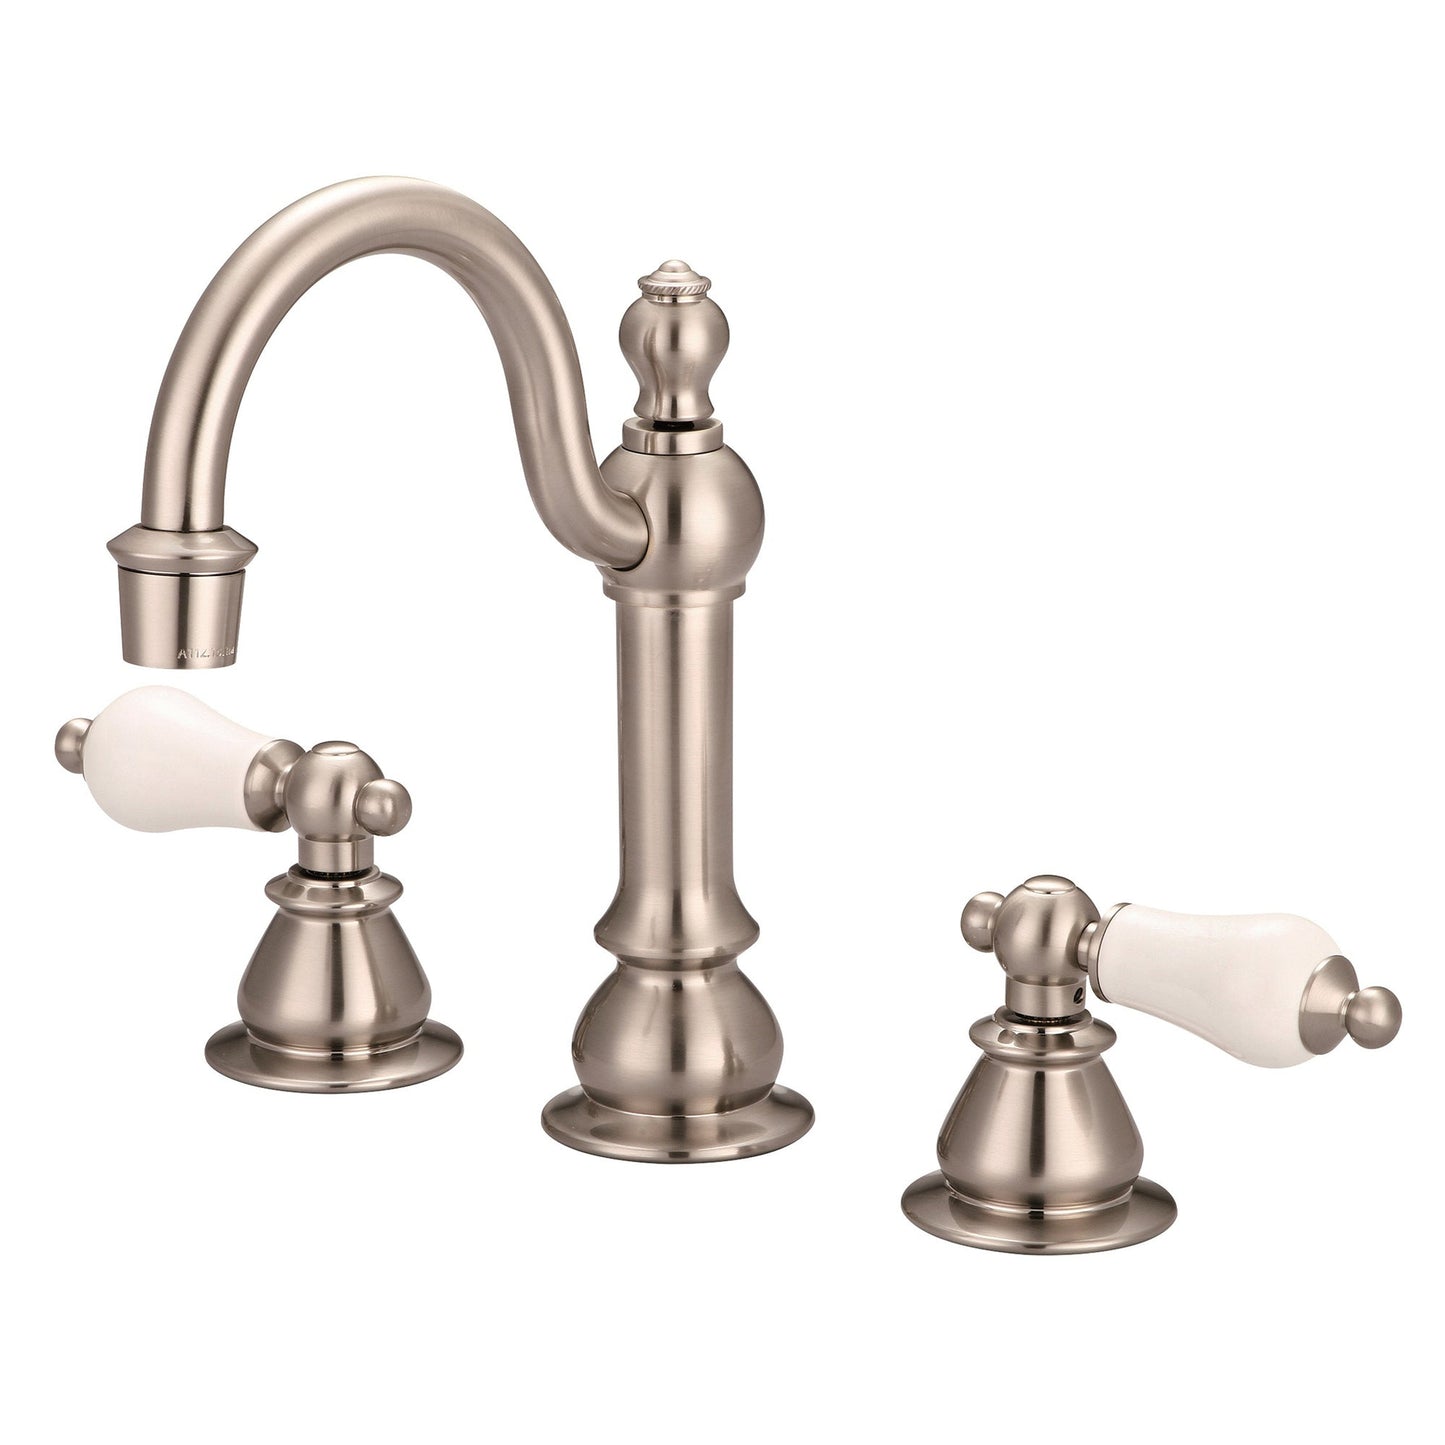 Water Creation American 20th Century Classic Widespread Lavatory F2-0012 8" Grey Solid Brass Faucet With Pop-Up Drain And Porcelain Lever Handles